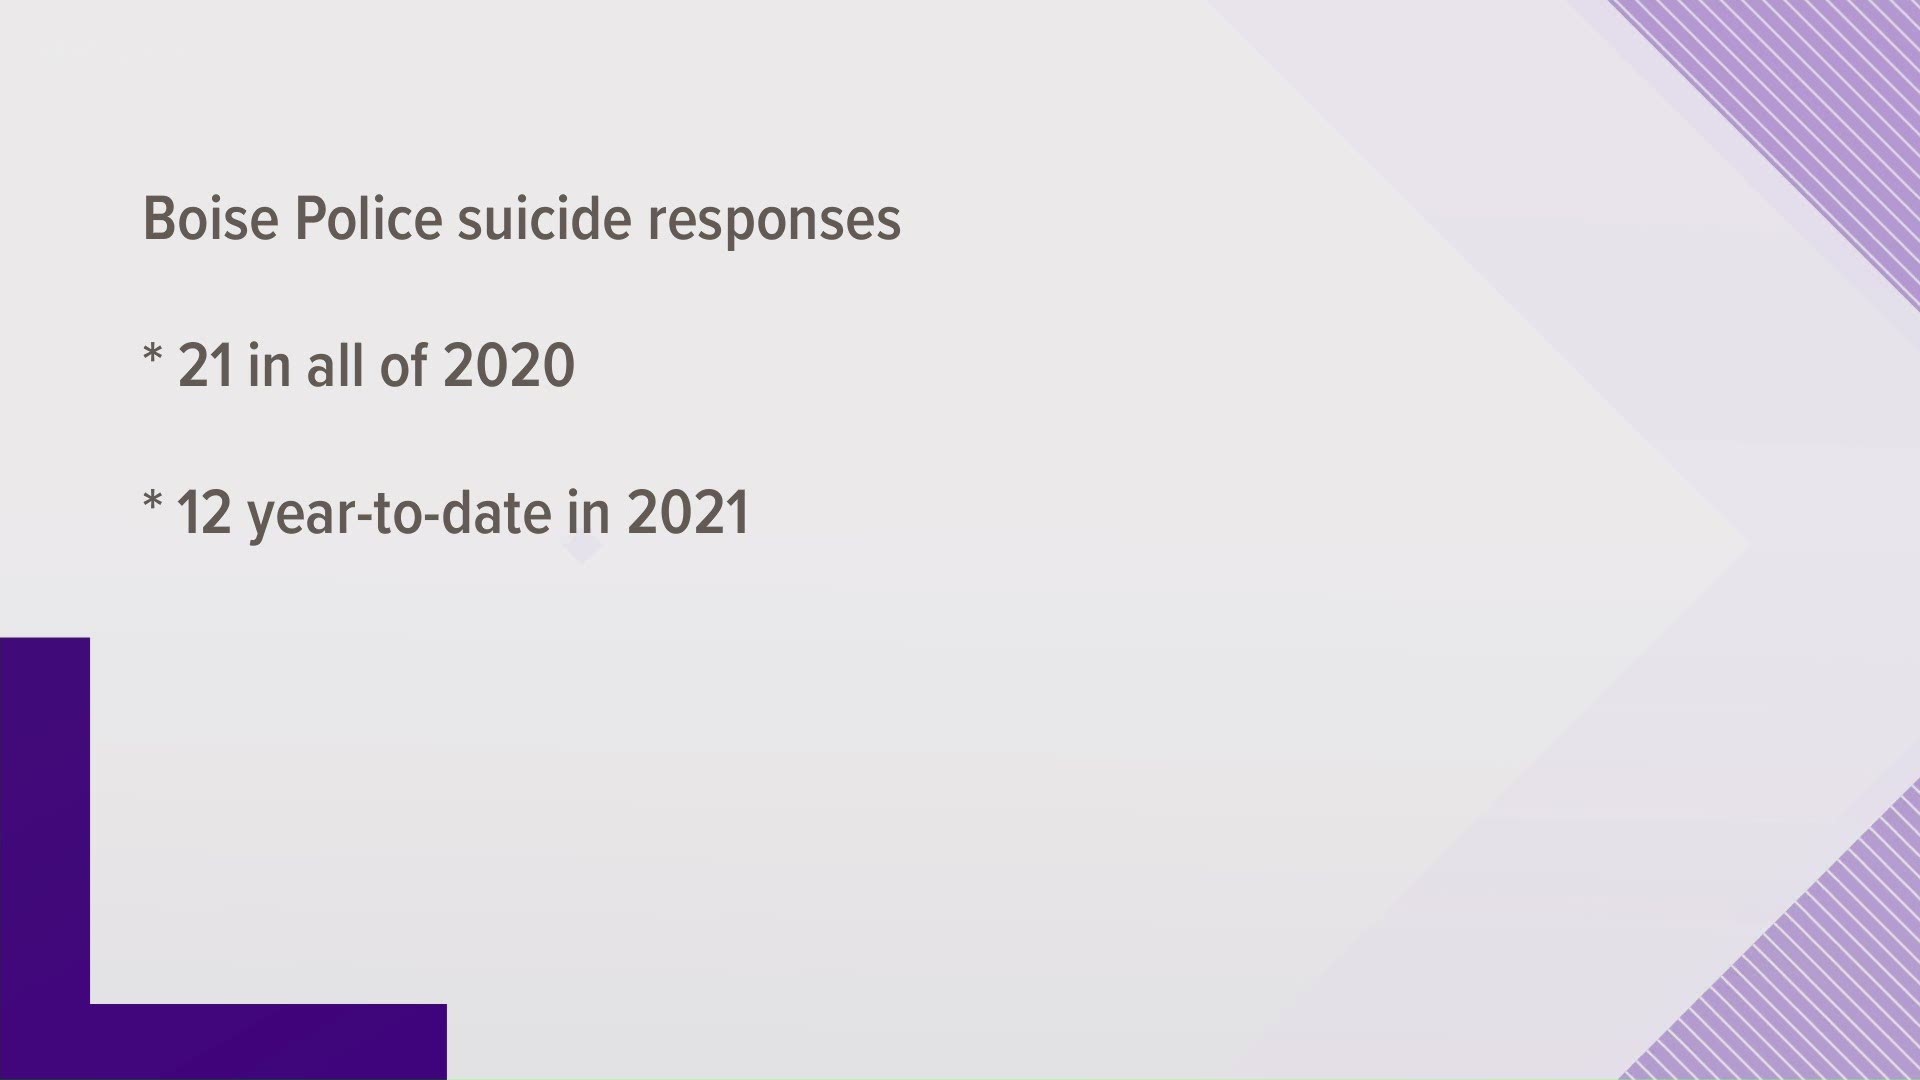 Boise Police have responded to 12 suicide calls in 2021. They are calling for community action.